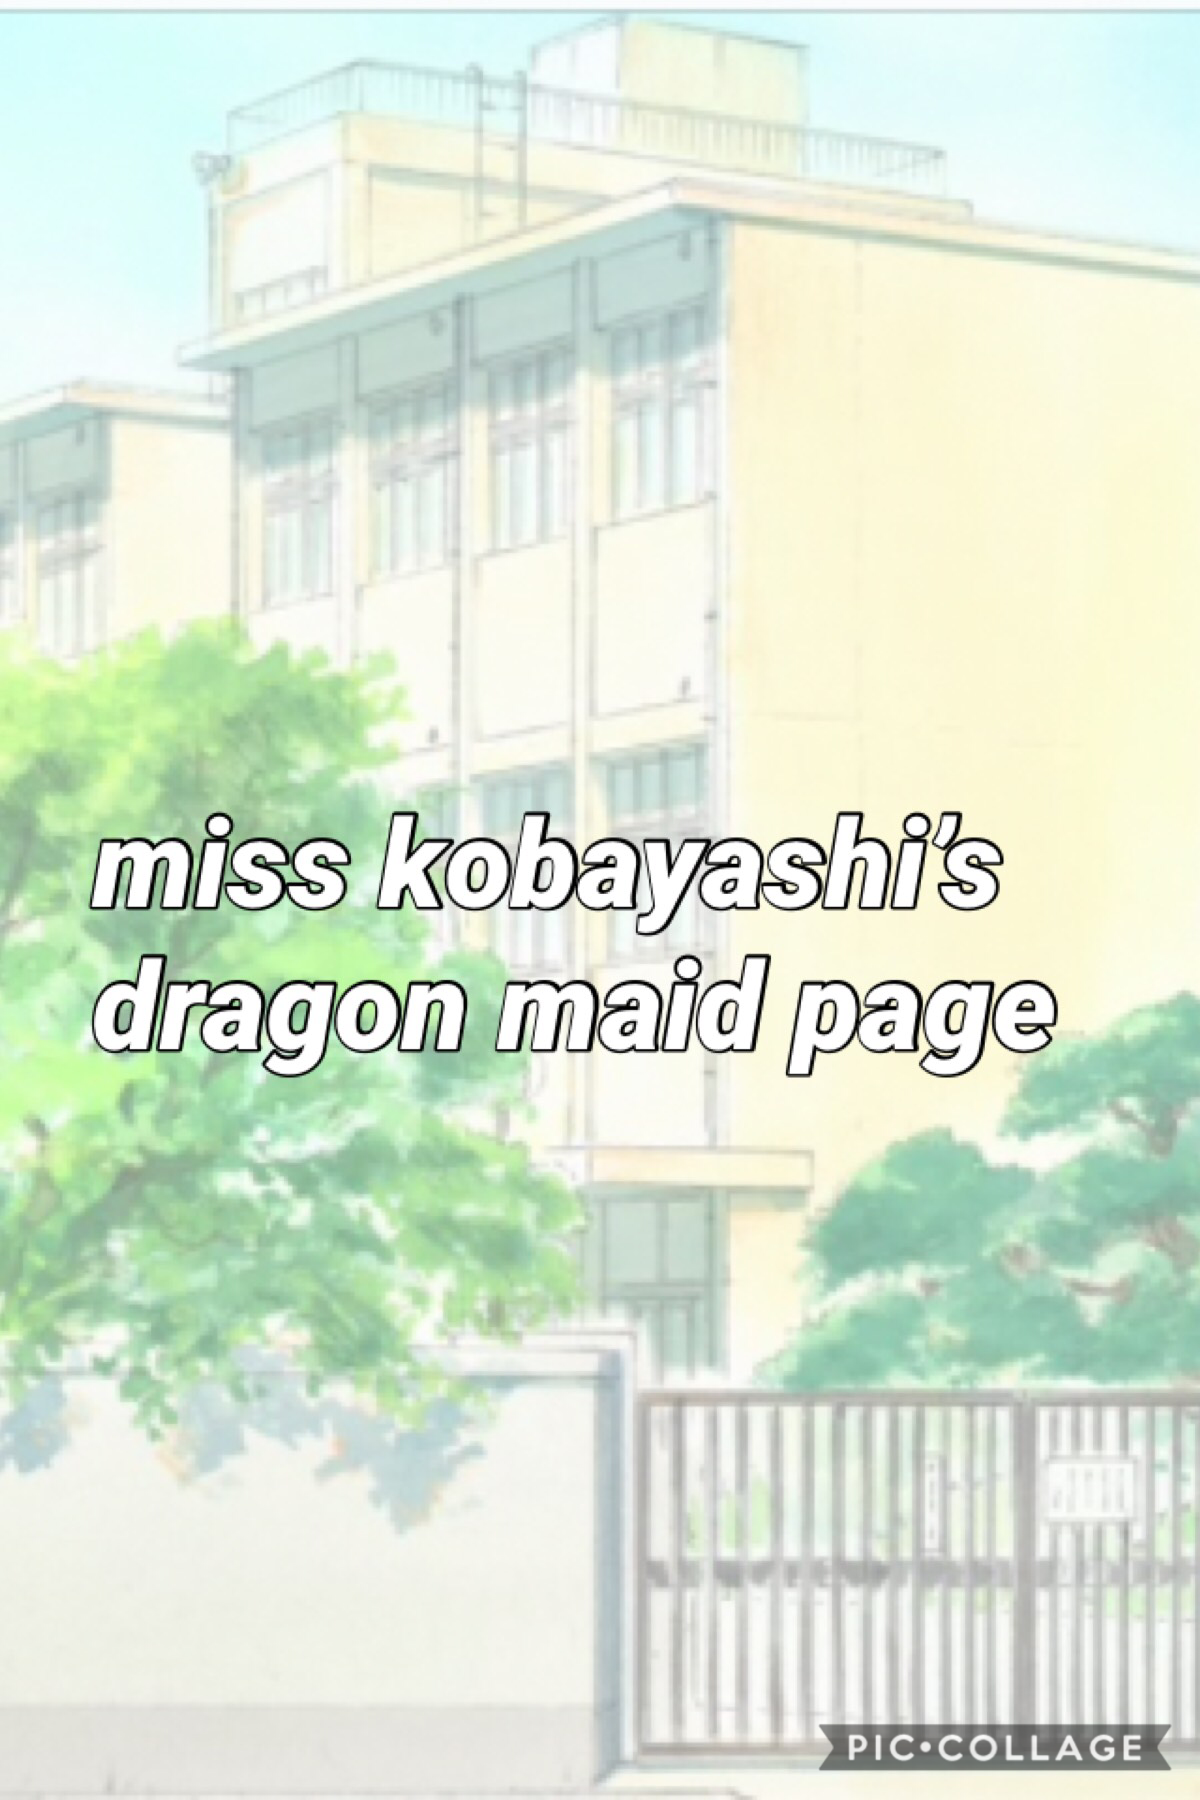 -reply- oooo, feel free to chat about kobayashi dragon maid here!